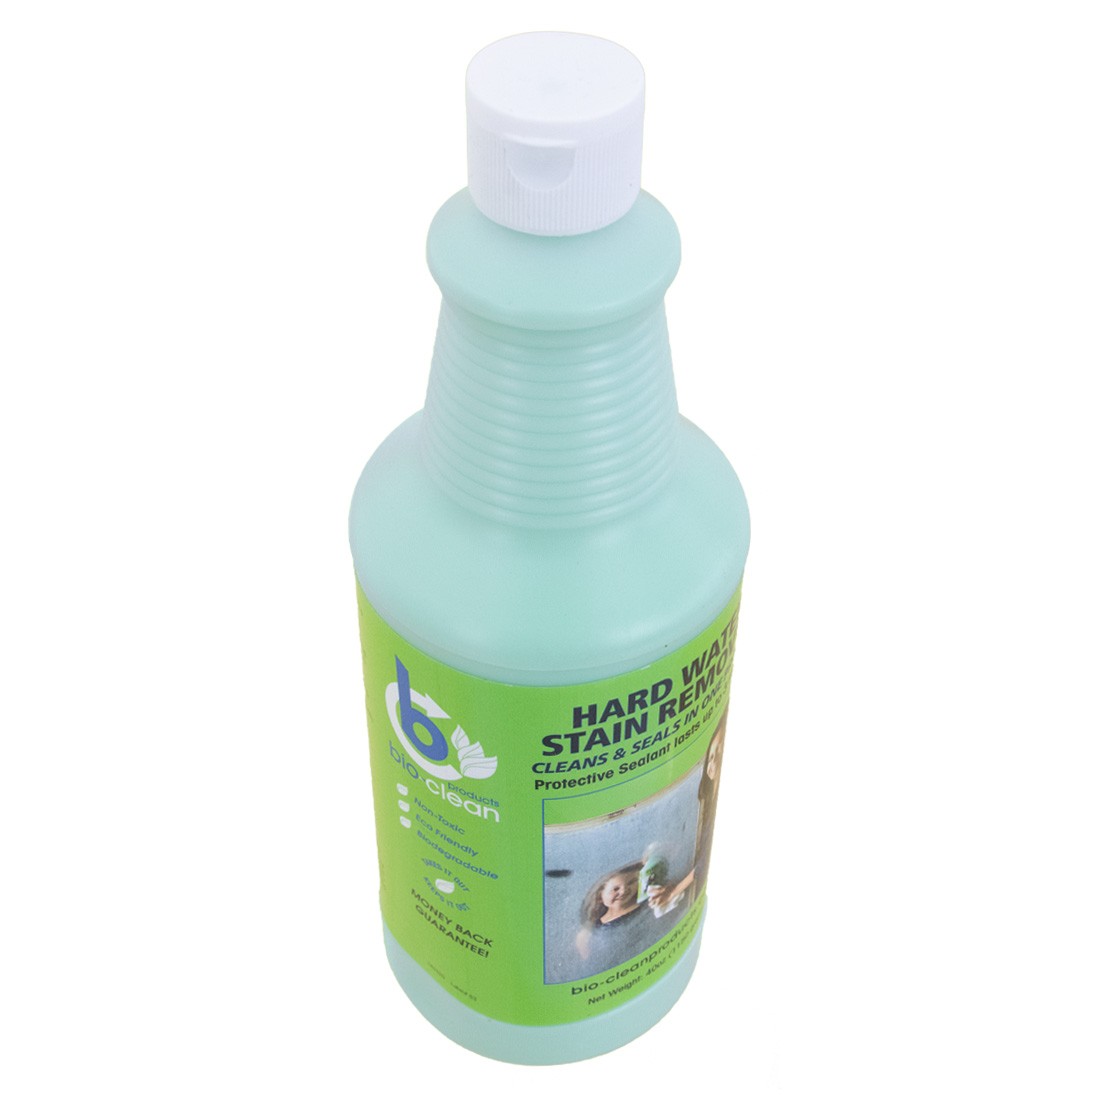 Bio-Clean Hard Water Stain Remover 40 oz Top View